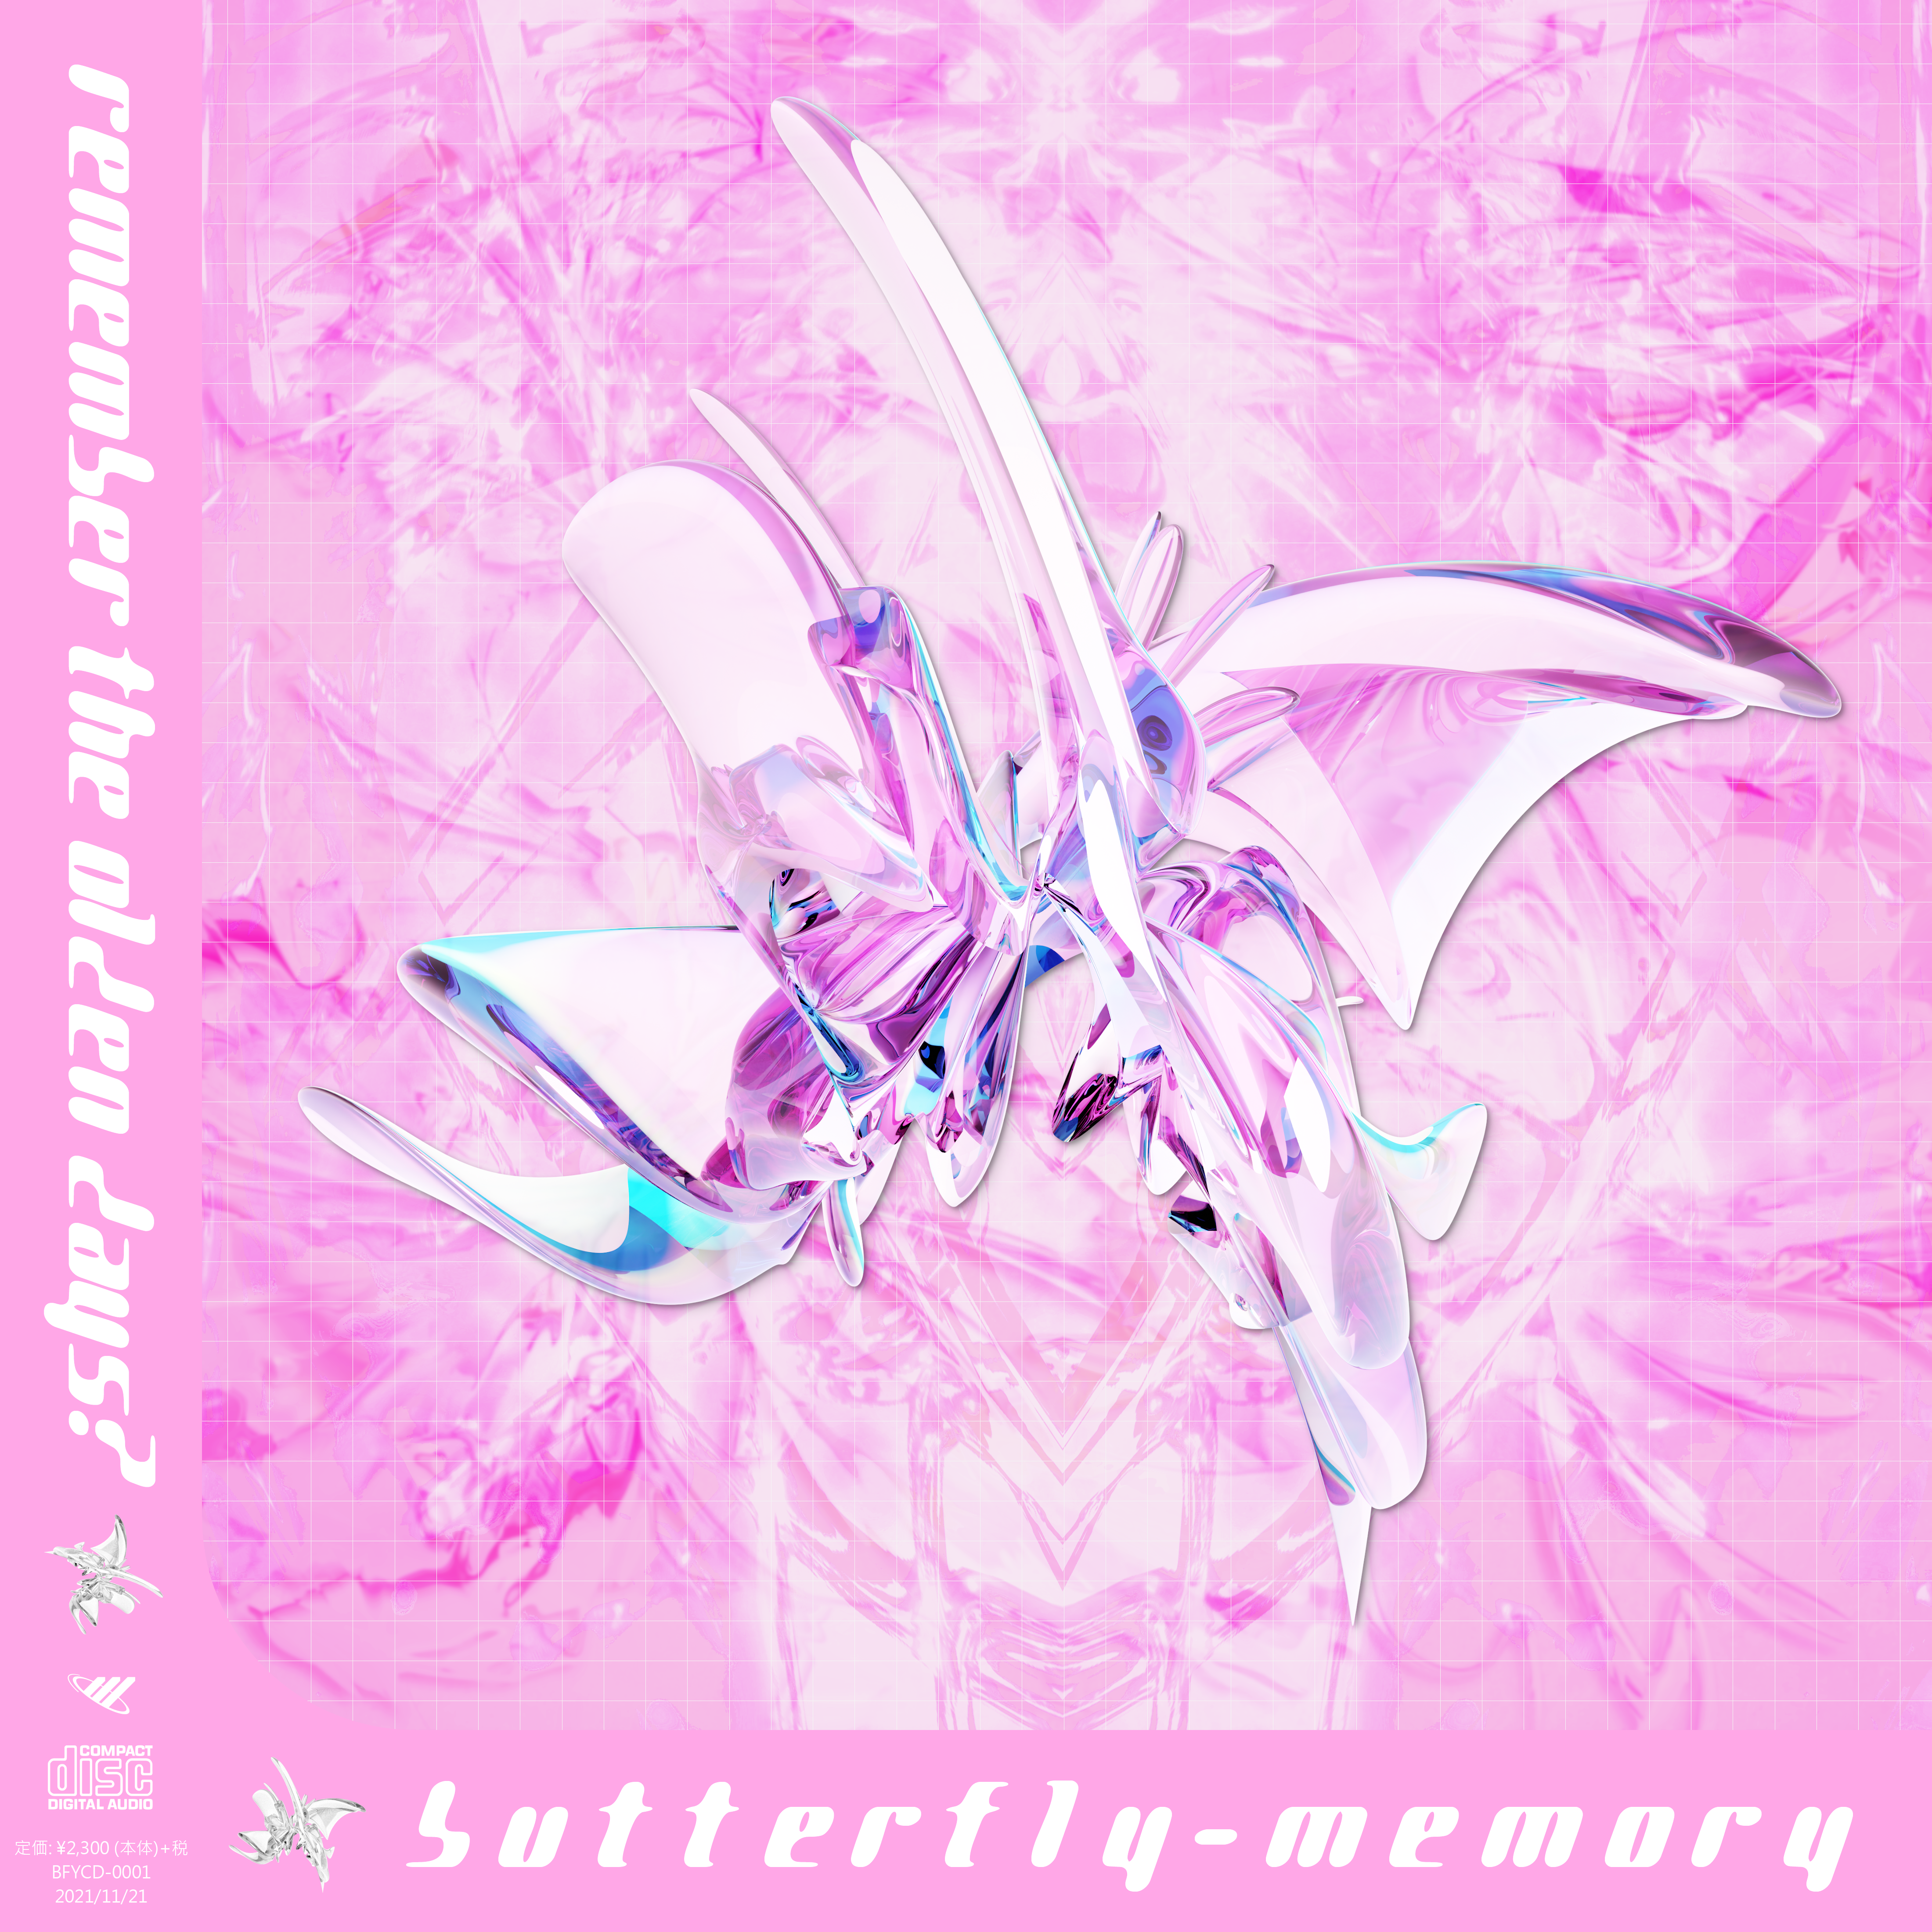 Fake album cover with pink form.